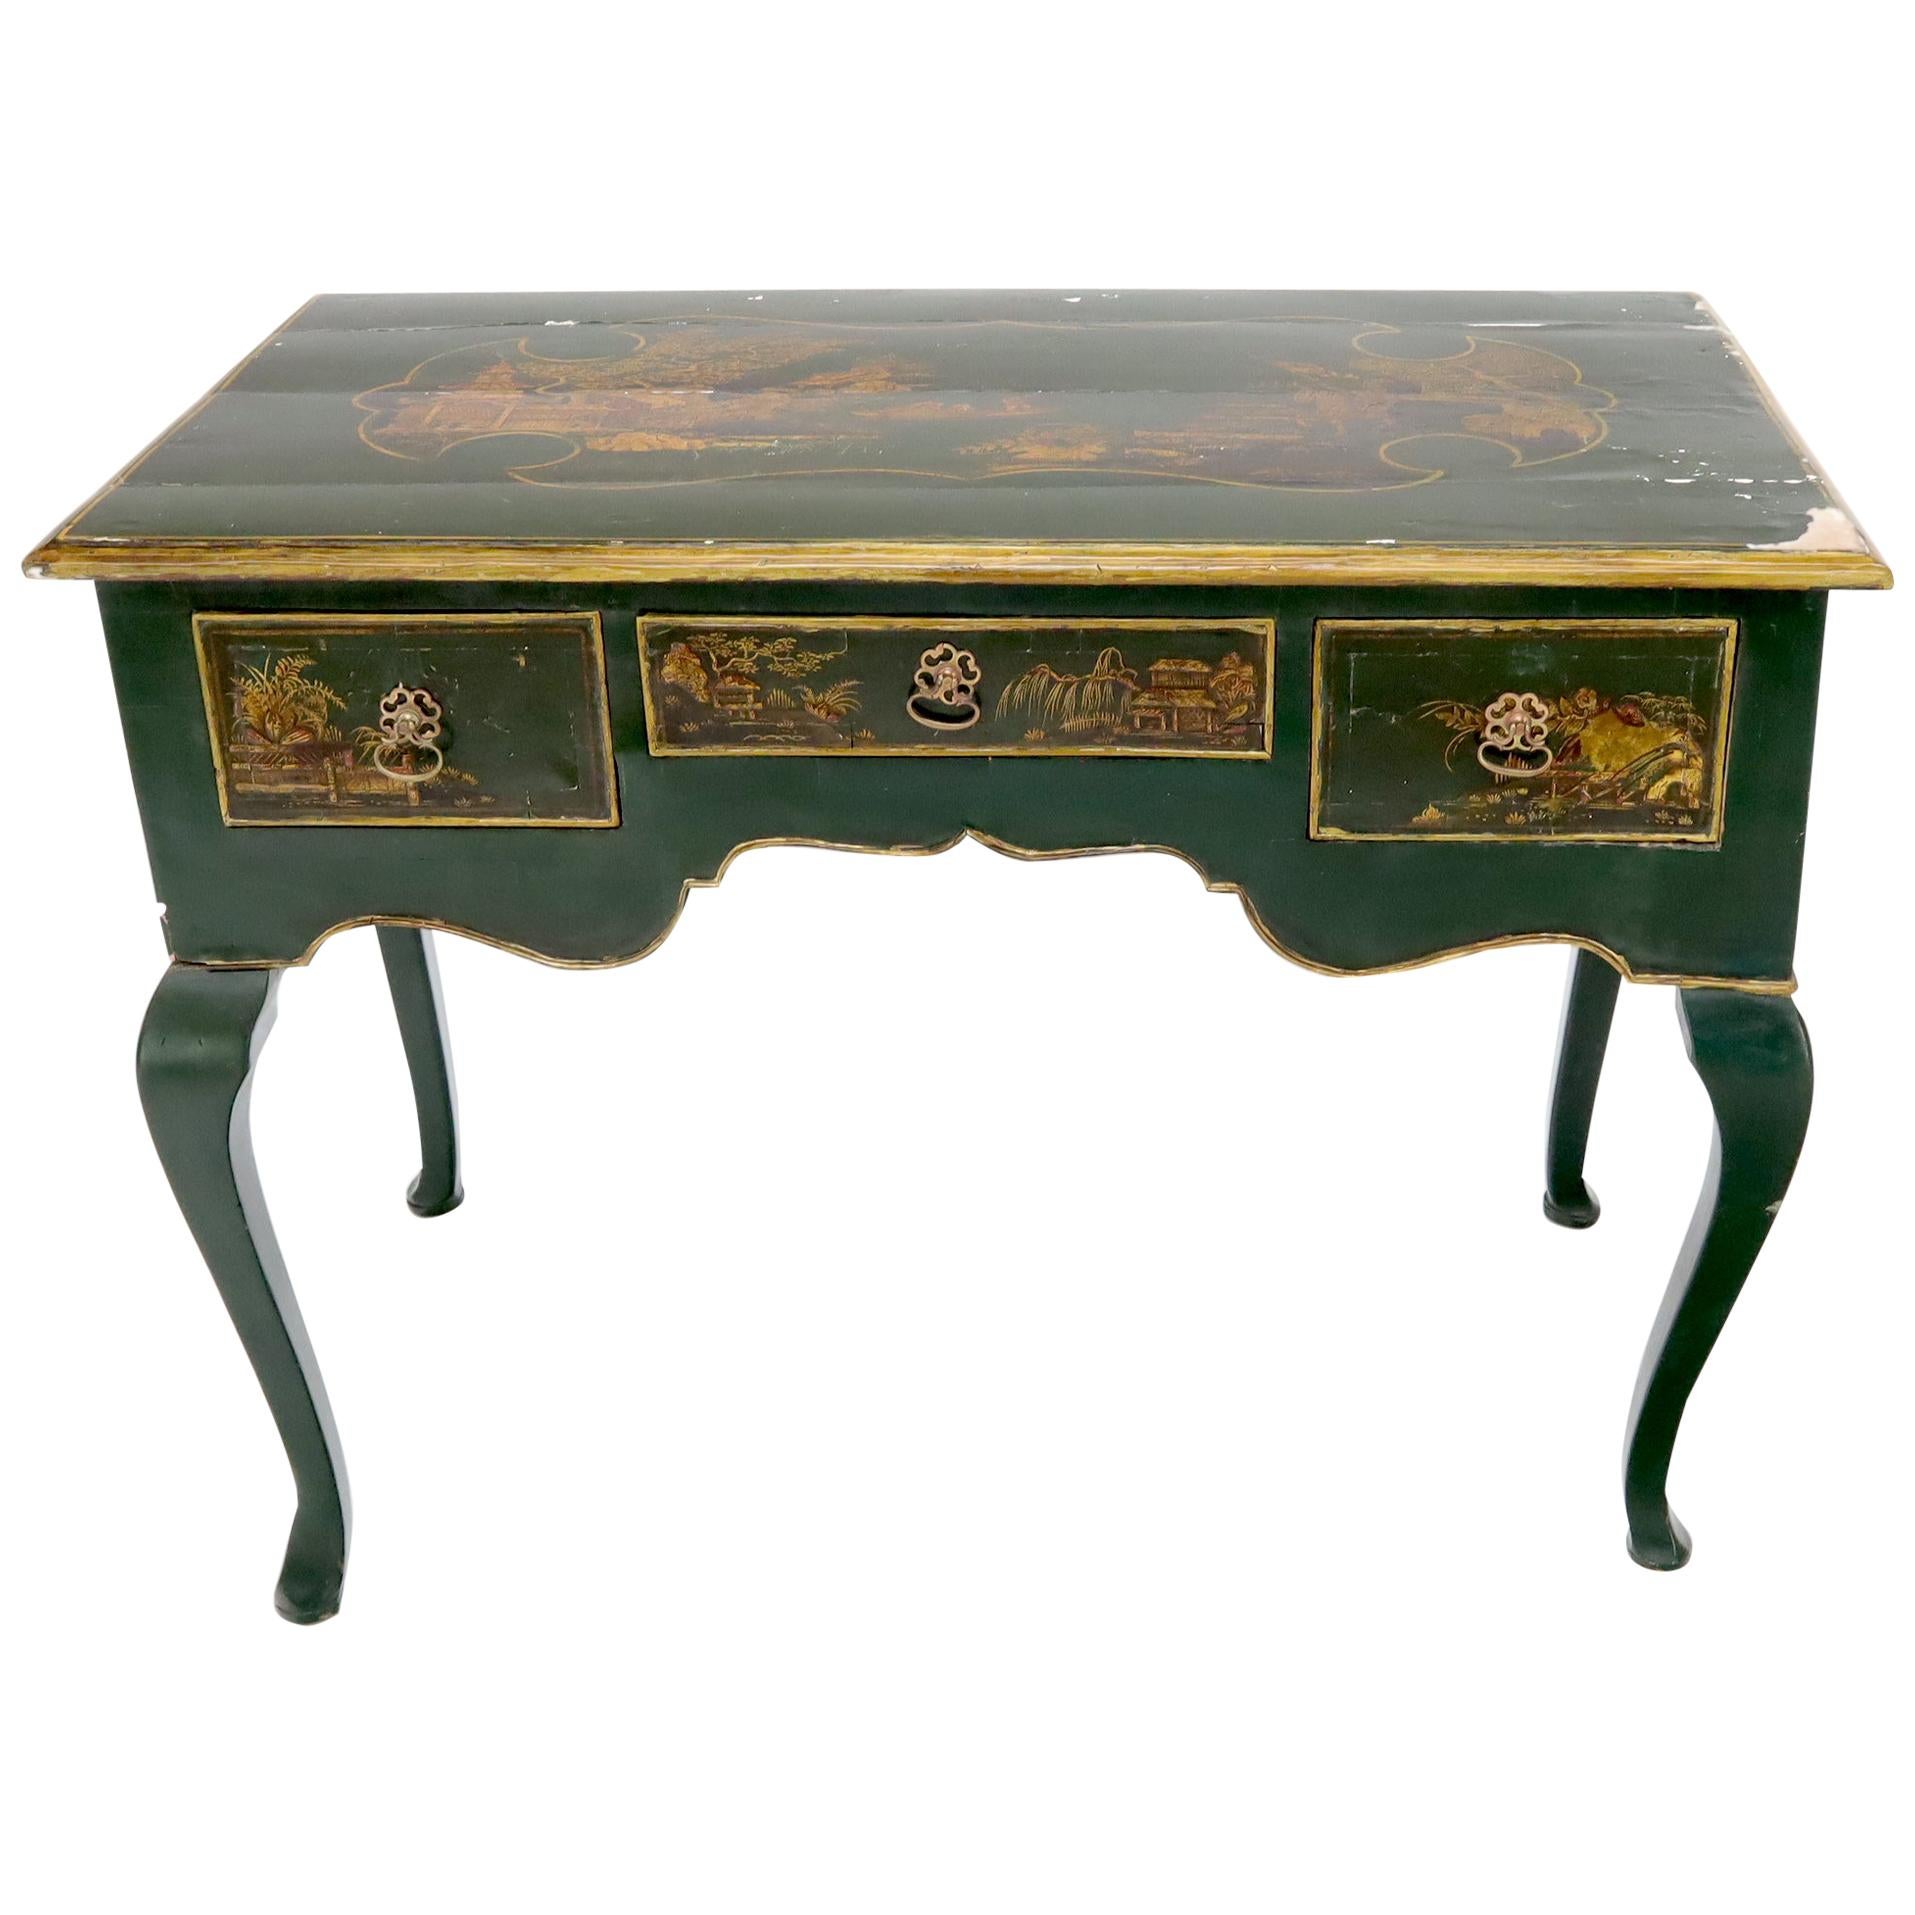 Antique 18th Century Hand Decorated Chinoiserie Desk